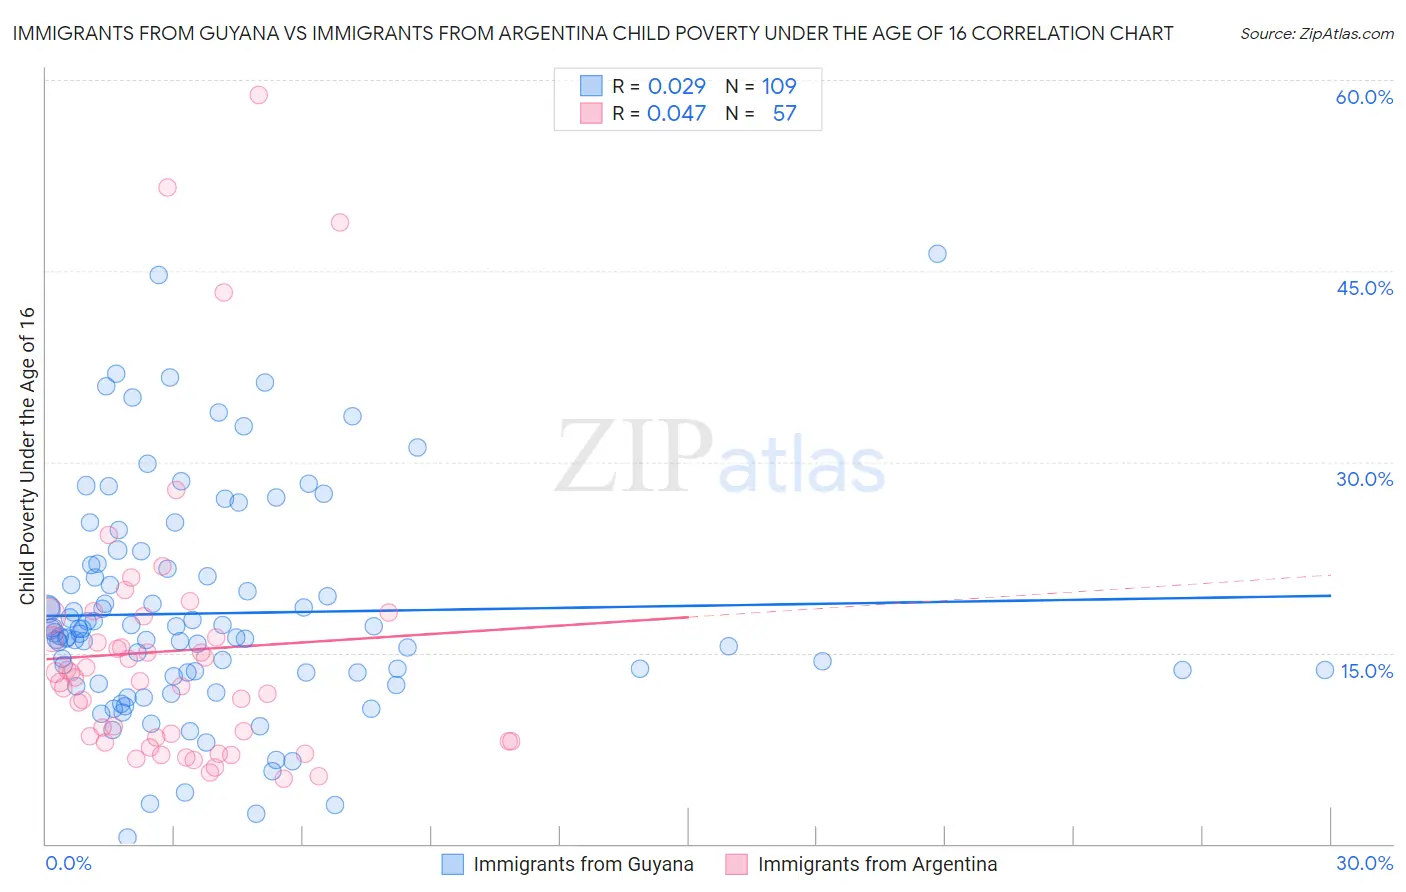 Immigrants from Guyana vs Immigrants from Argentina Child Poverty Under the Age of 16